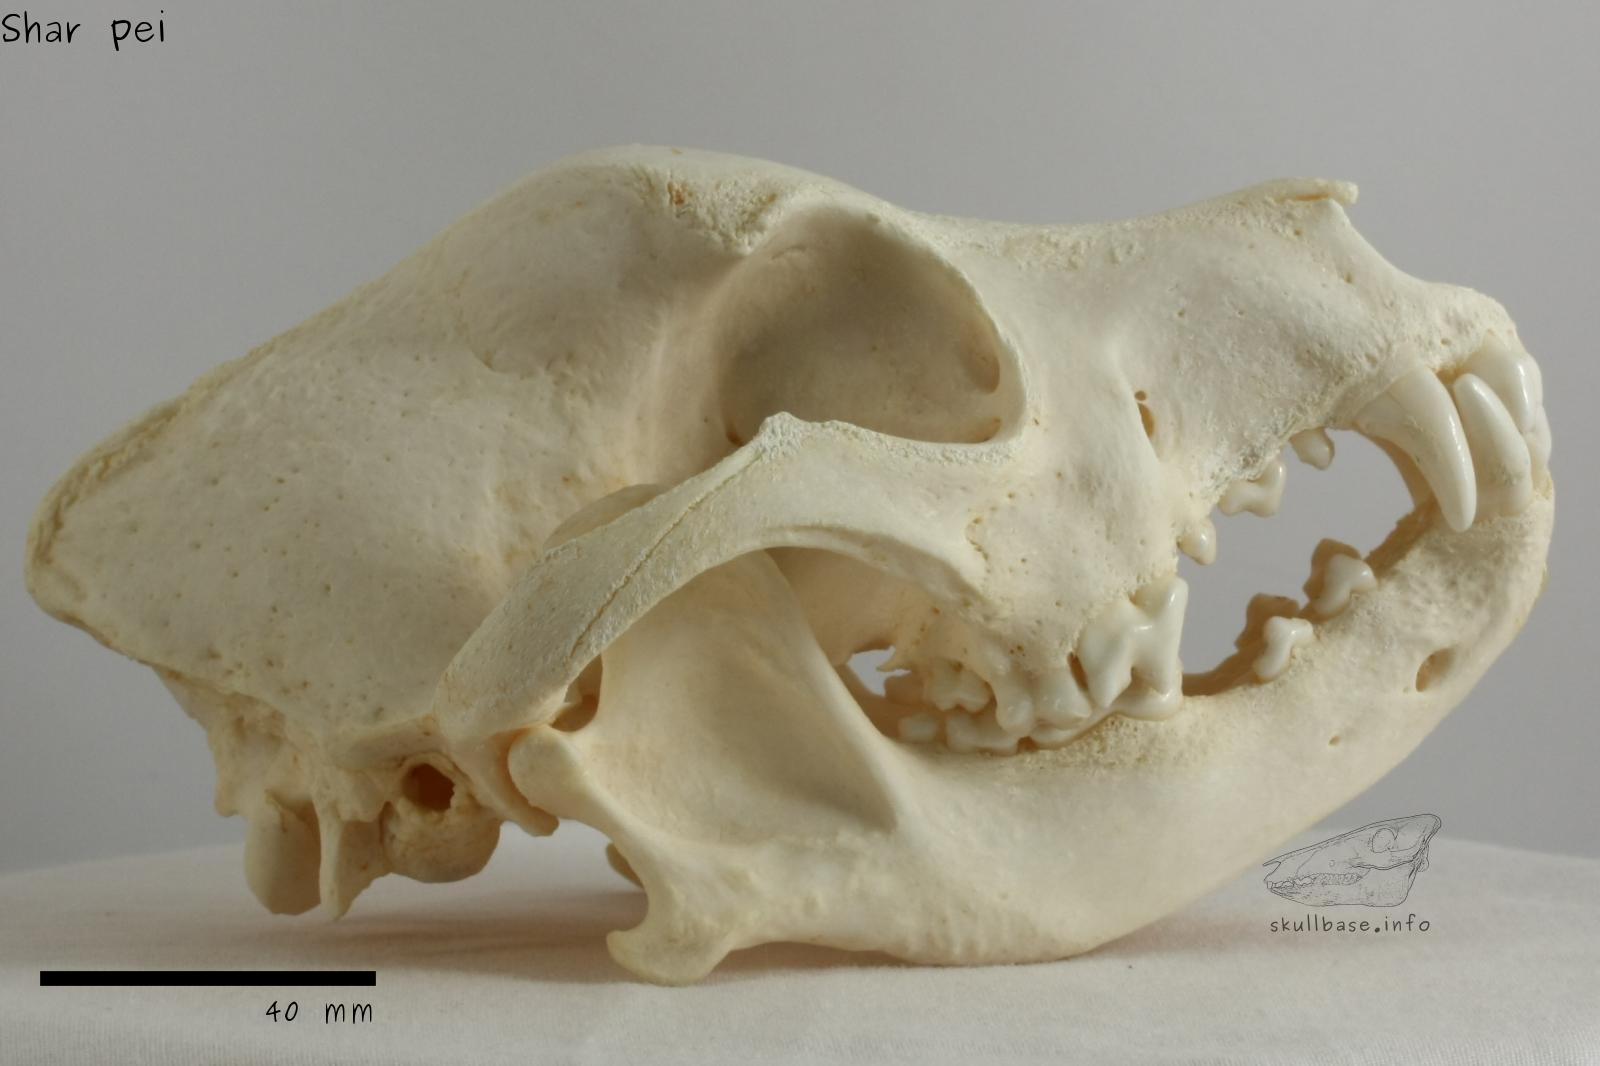 Shar pei (Canis lupus familiaris) skull lateral view